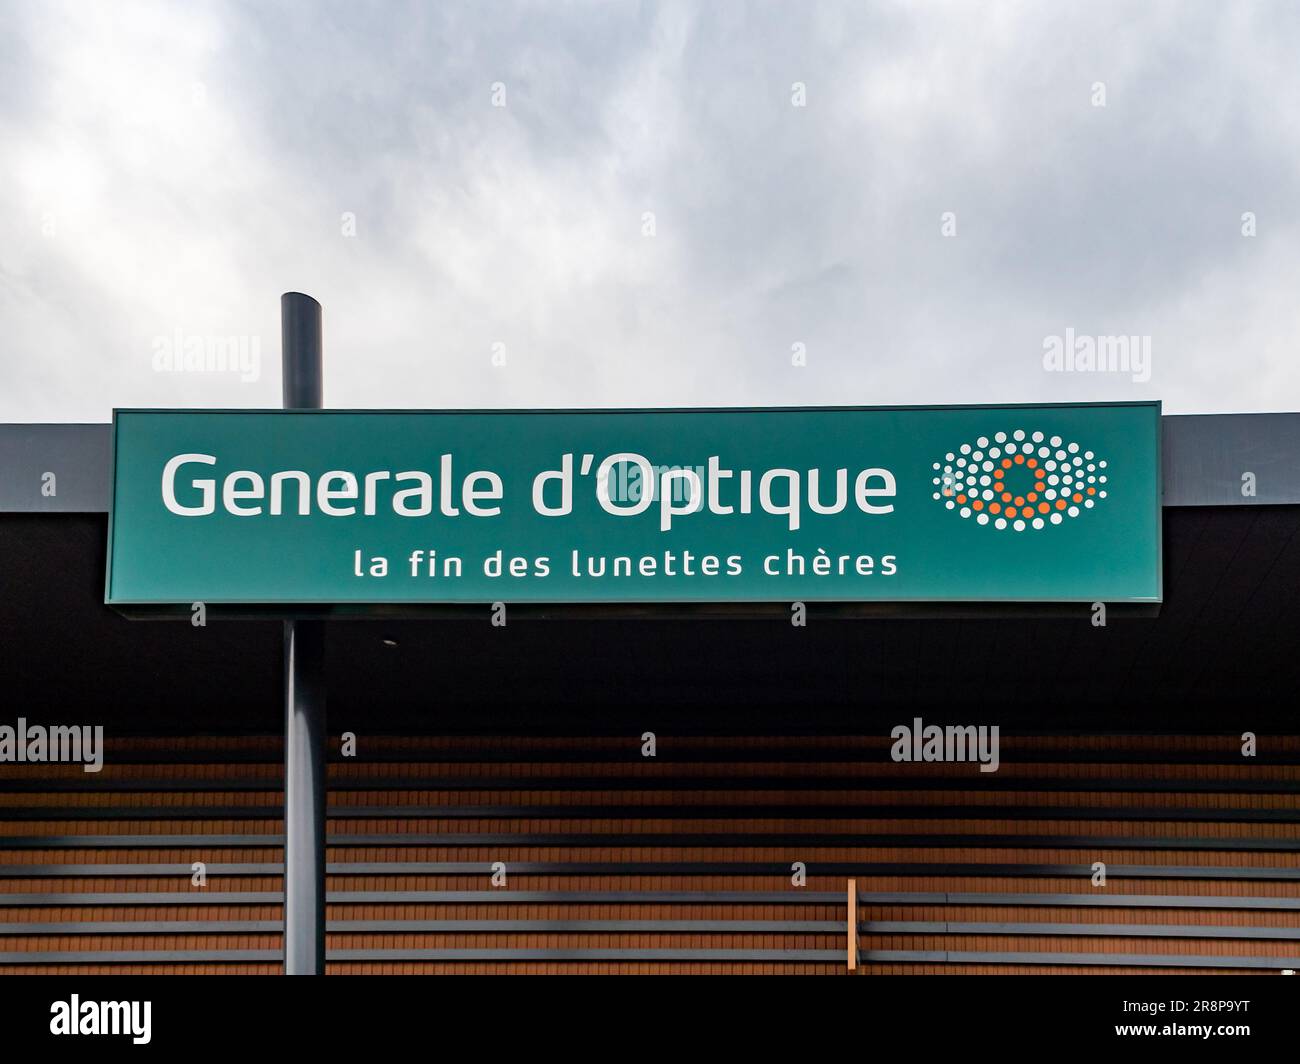 An exterior shot of a retail optometry store with Generale d Optique sign displayed on the storefront Stock Photo